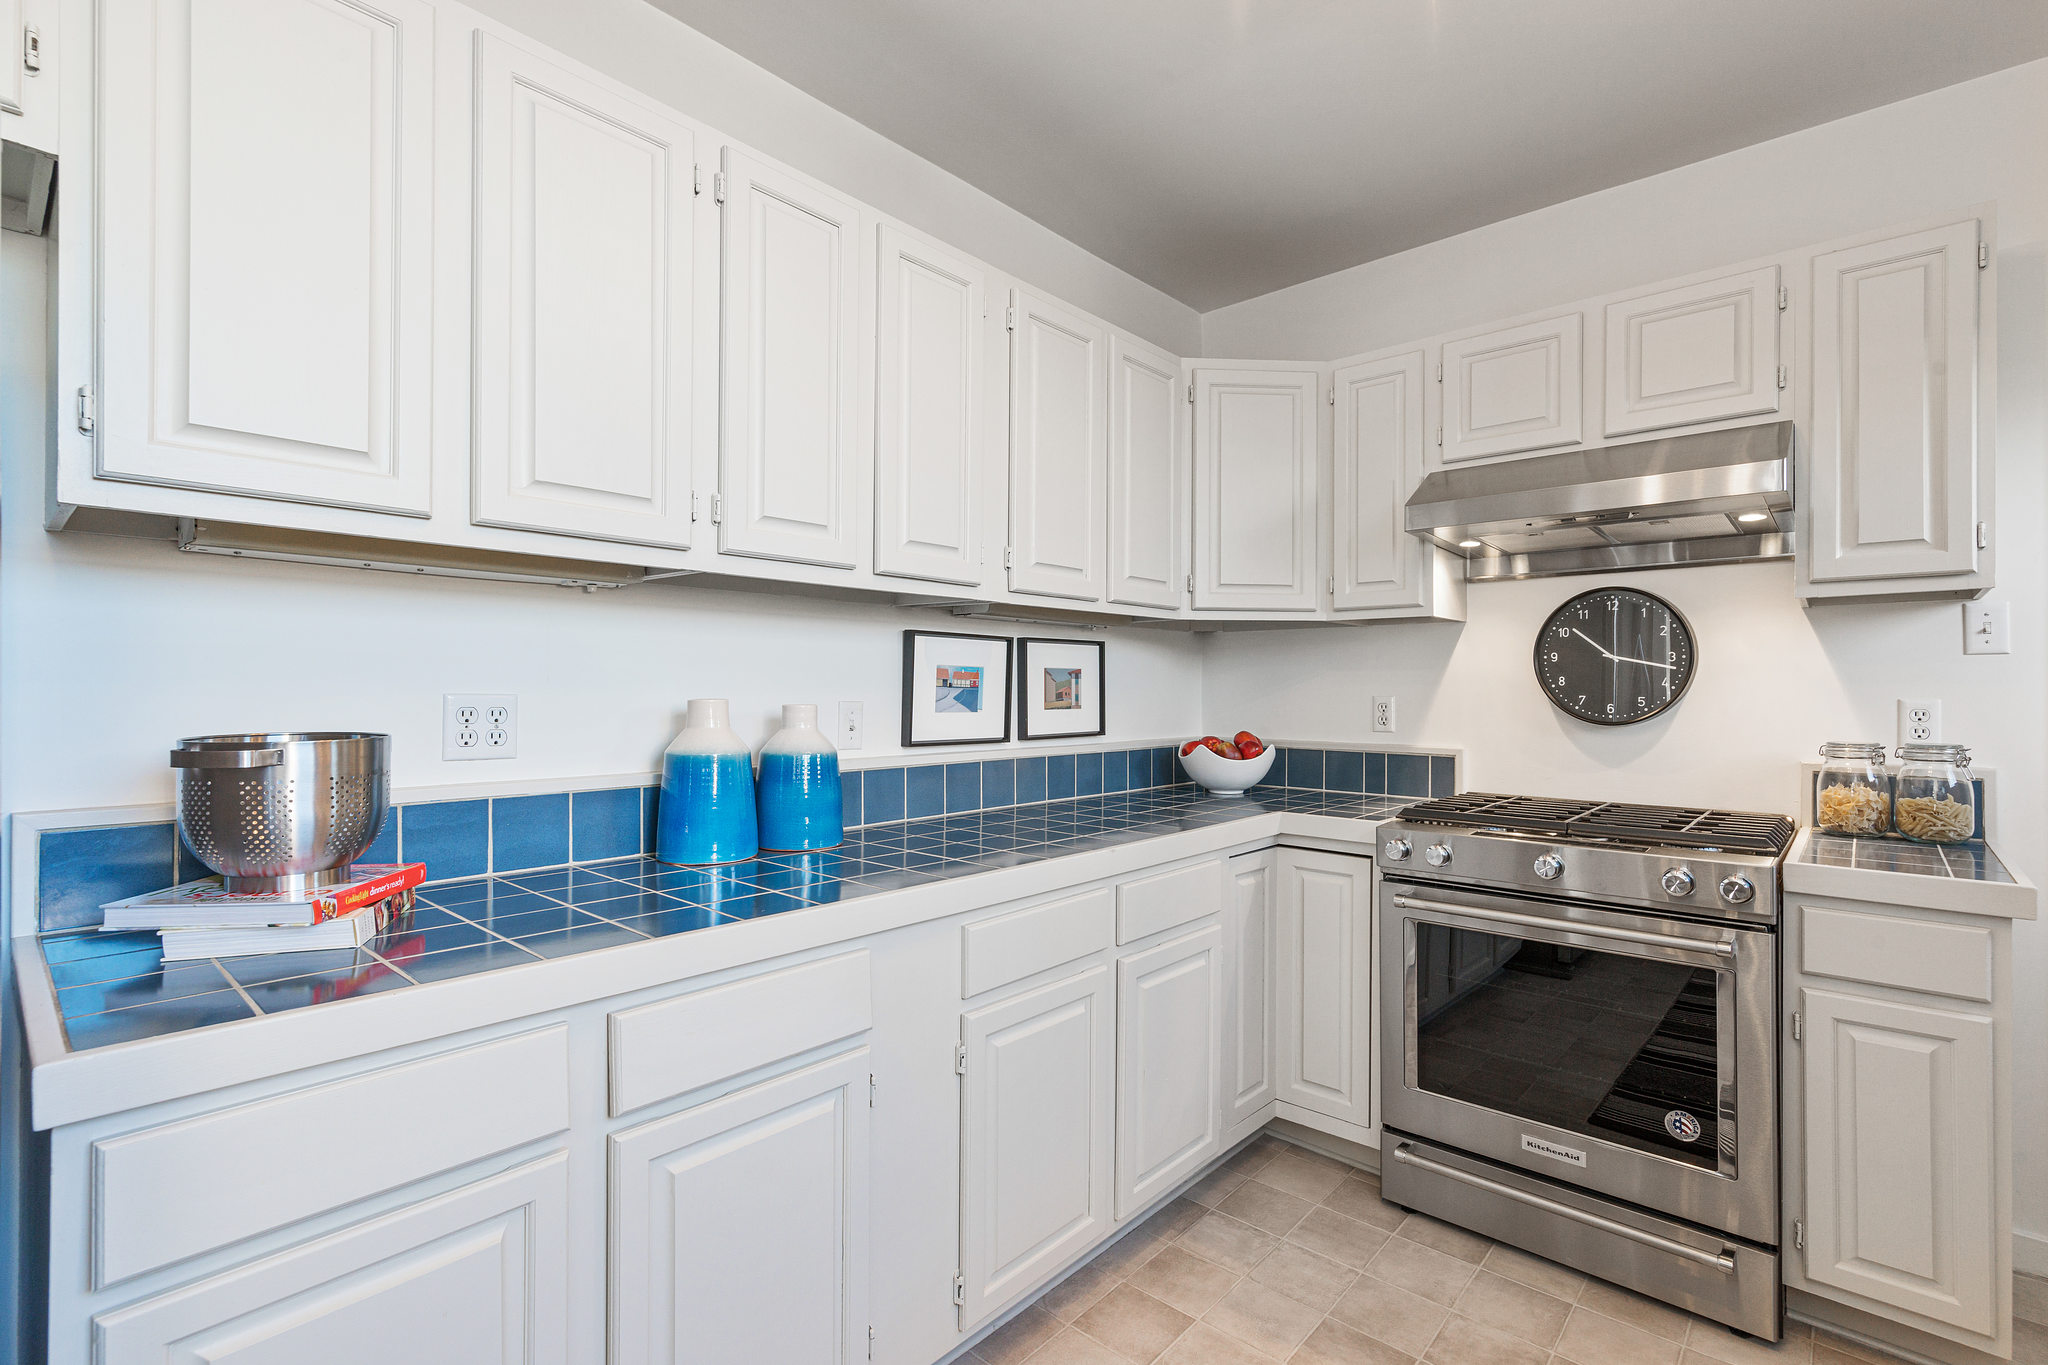 Property Photo: View of the kitchen, showing the primary cooking area and blue tile counter-tops